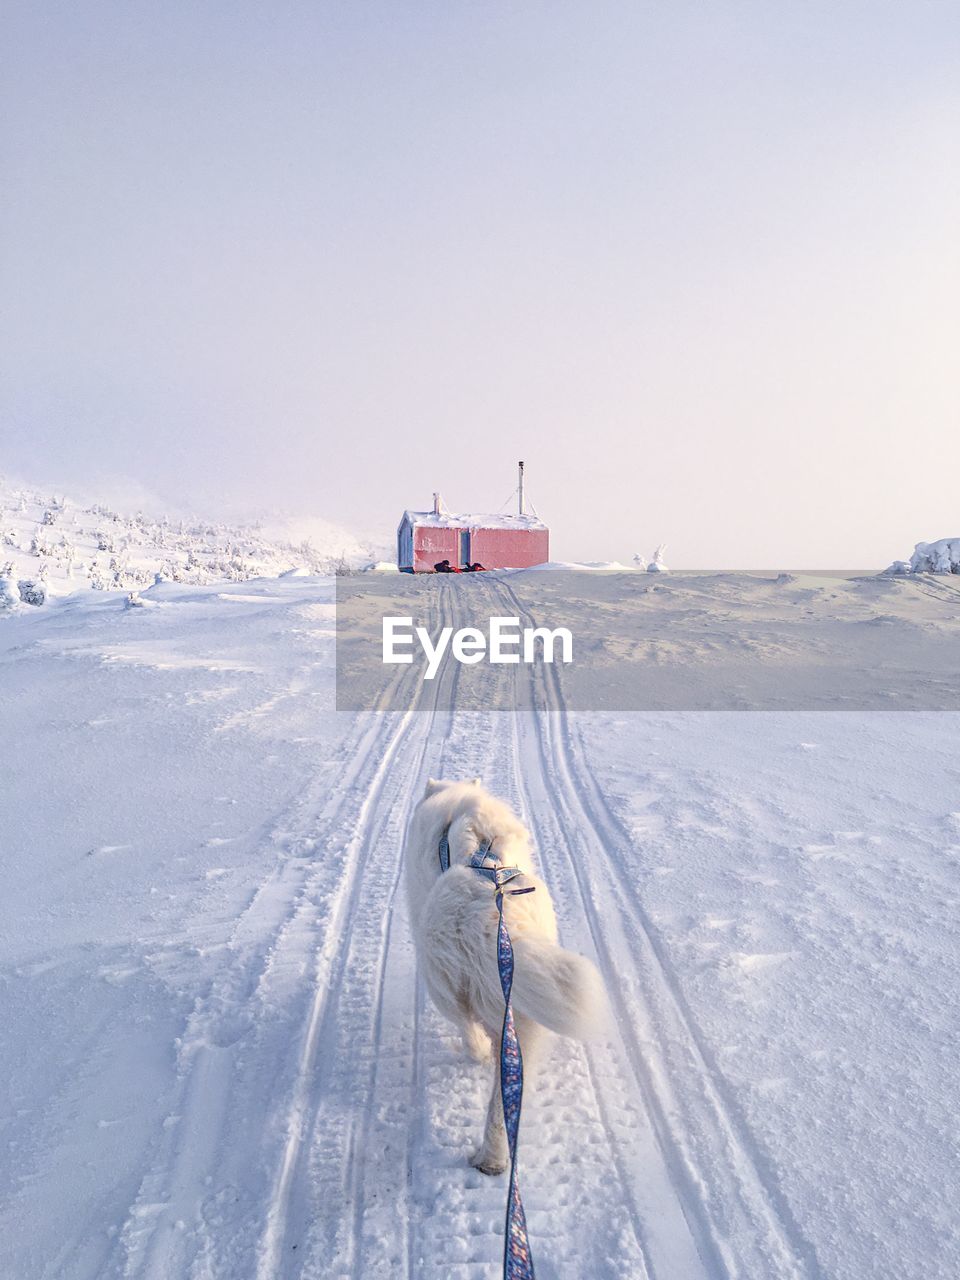 Dog on snow covered field against sky